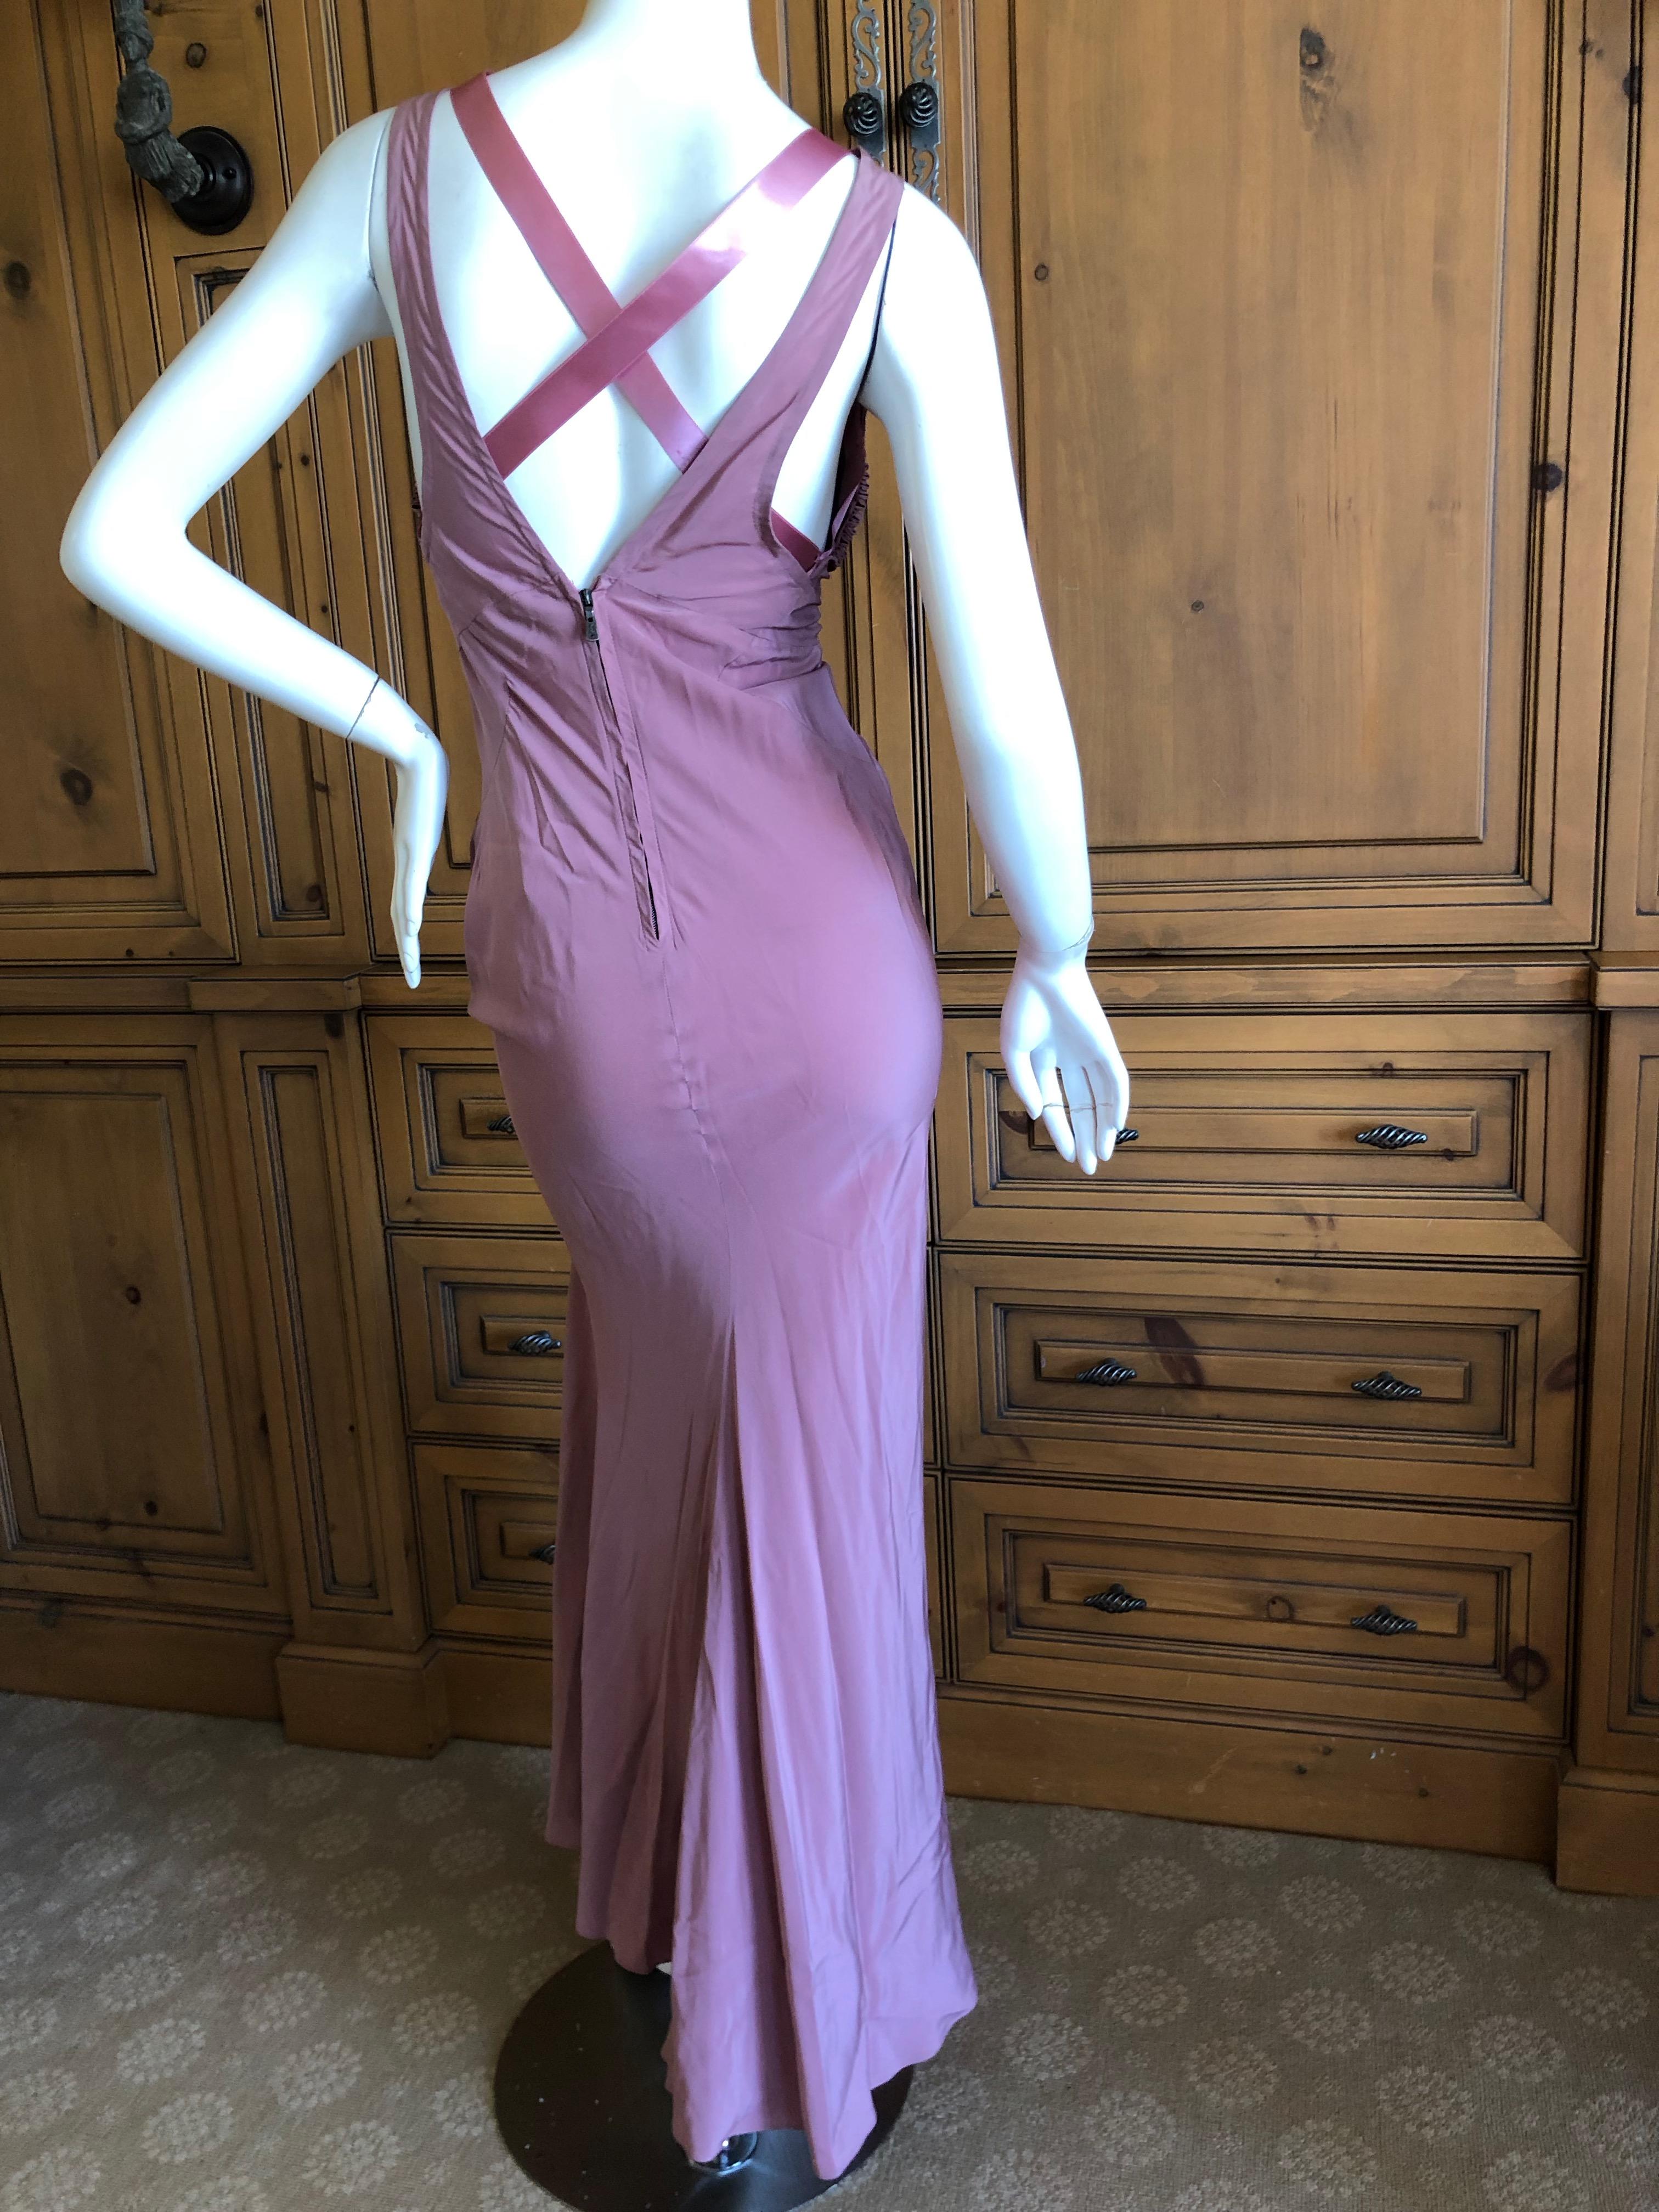 Yves Saint Laurent Tom Ford Mauve Pink Racer Back Evening Dress
No size tag, Small appx 36
Bust 36